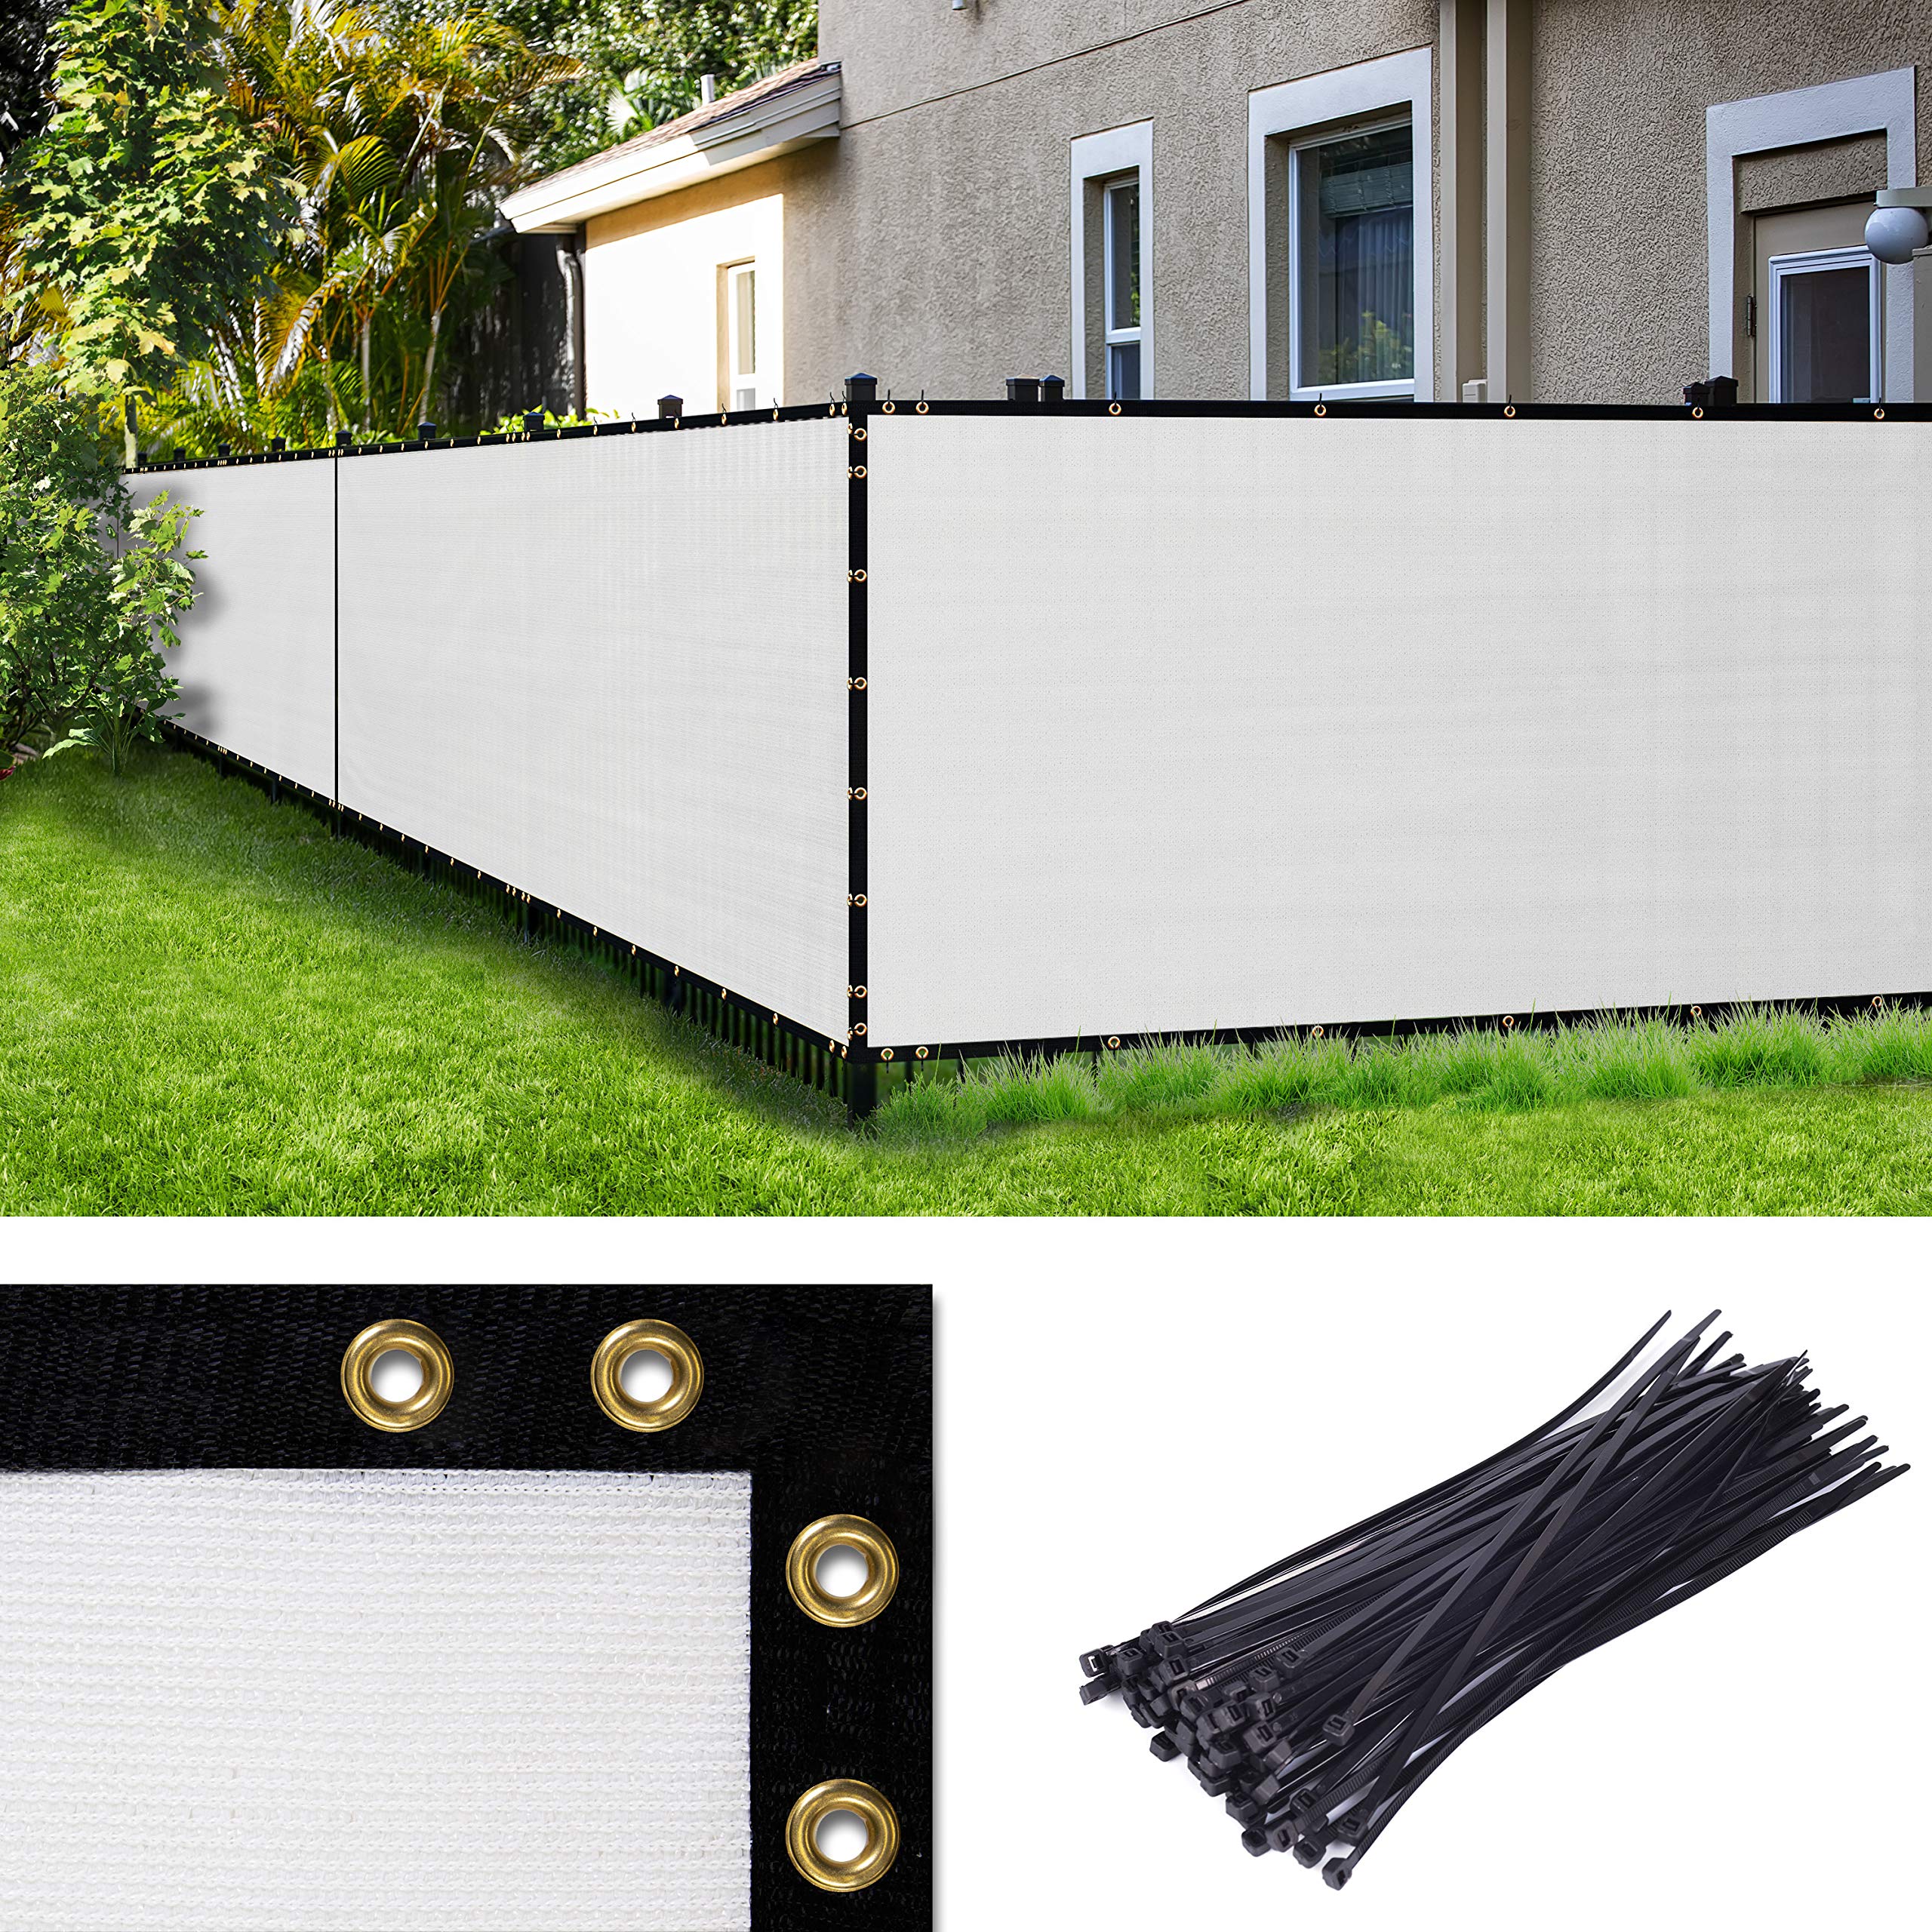 Amgo Custom Made 5' x 131' White Fence Privacy Screen Windscreen with Bindings & Grommets, Heavy Duty for Commercial and Residen